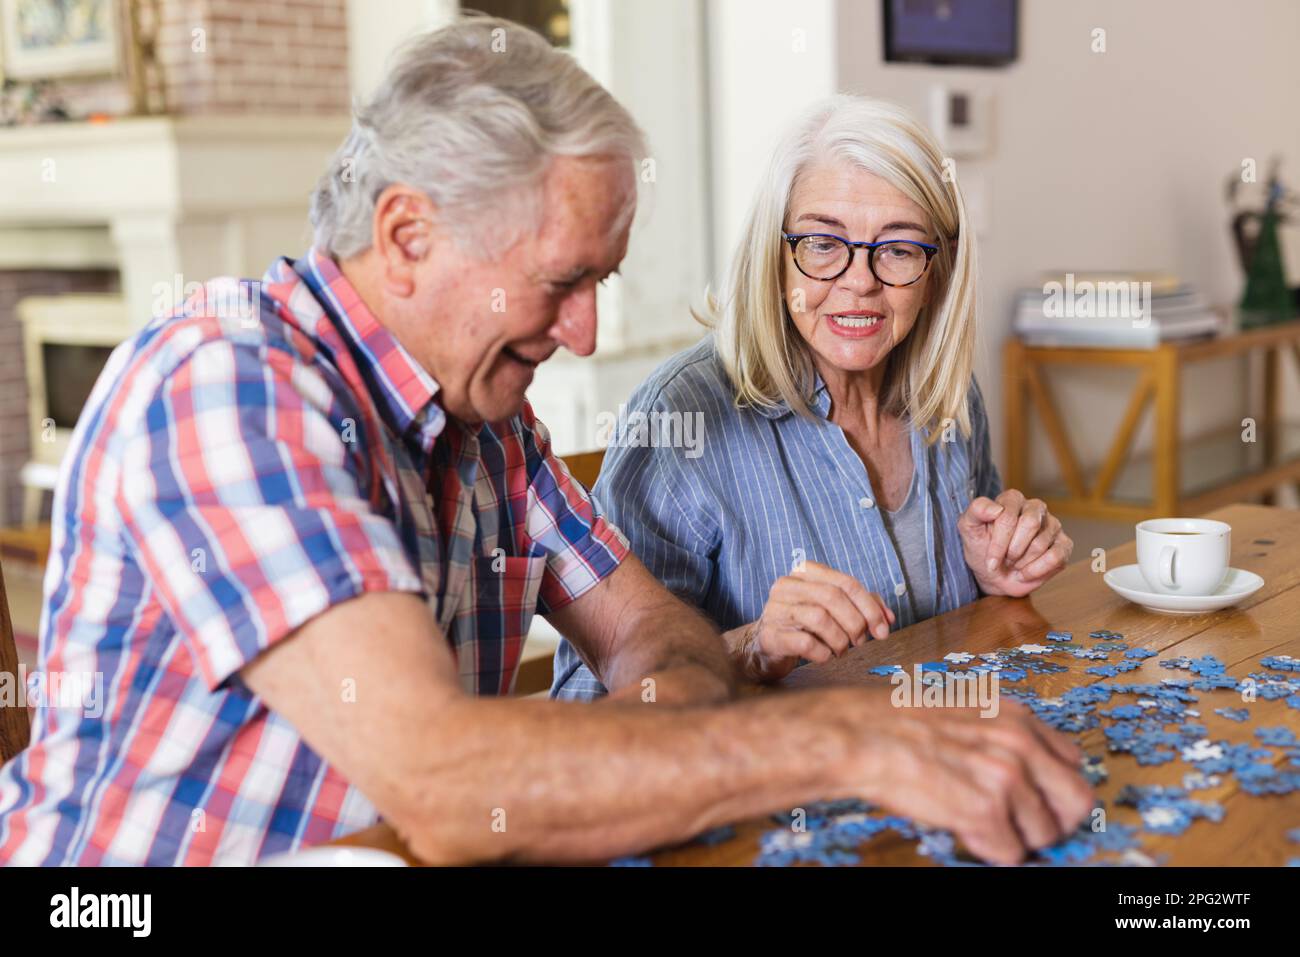 Happy caucasian senior friends sitting at table doing jigsaw puzzle together Stock Photo